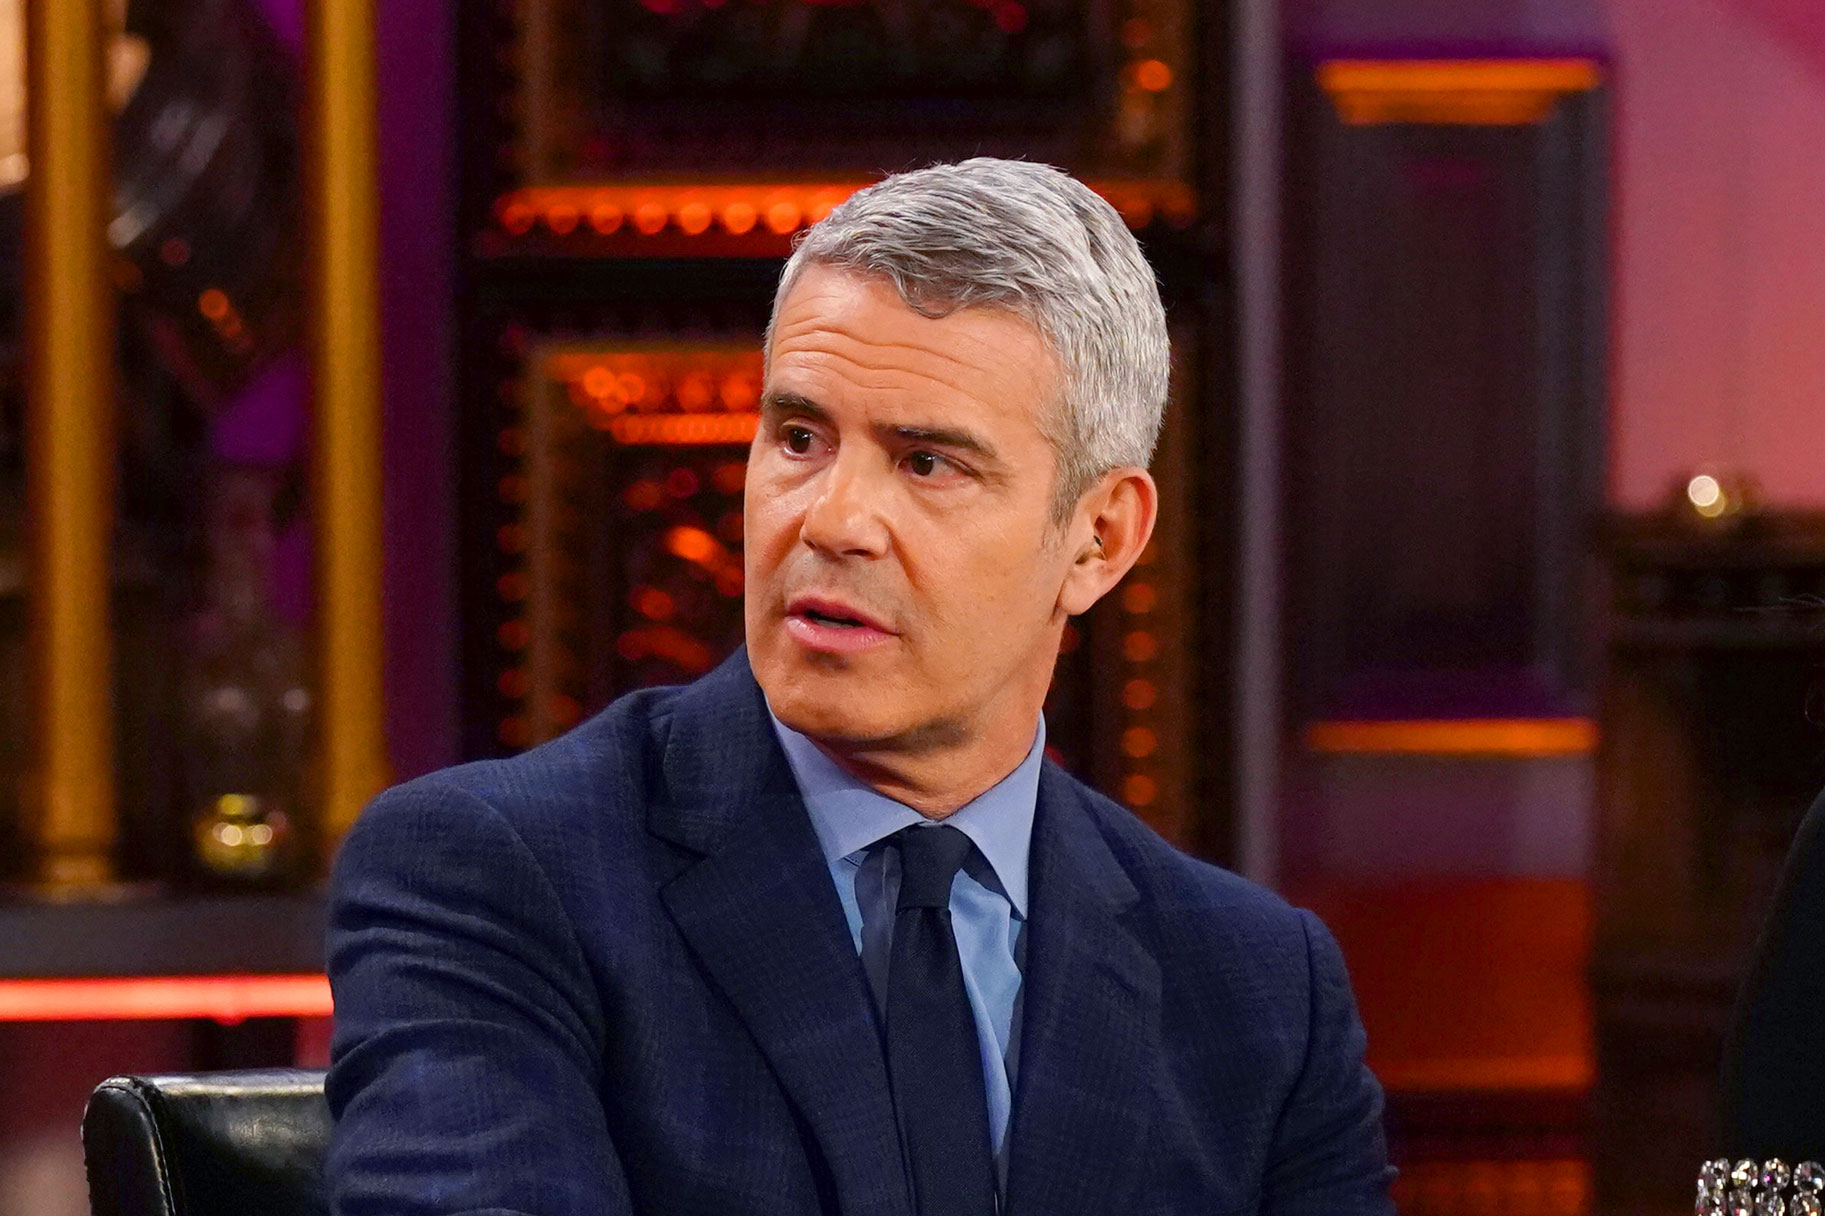 Andy Cohen at the Vanderpump Rules reunion.